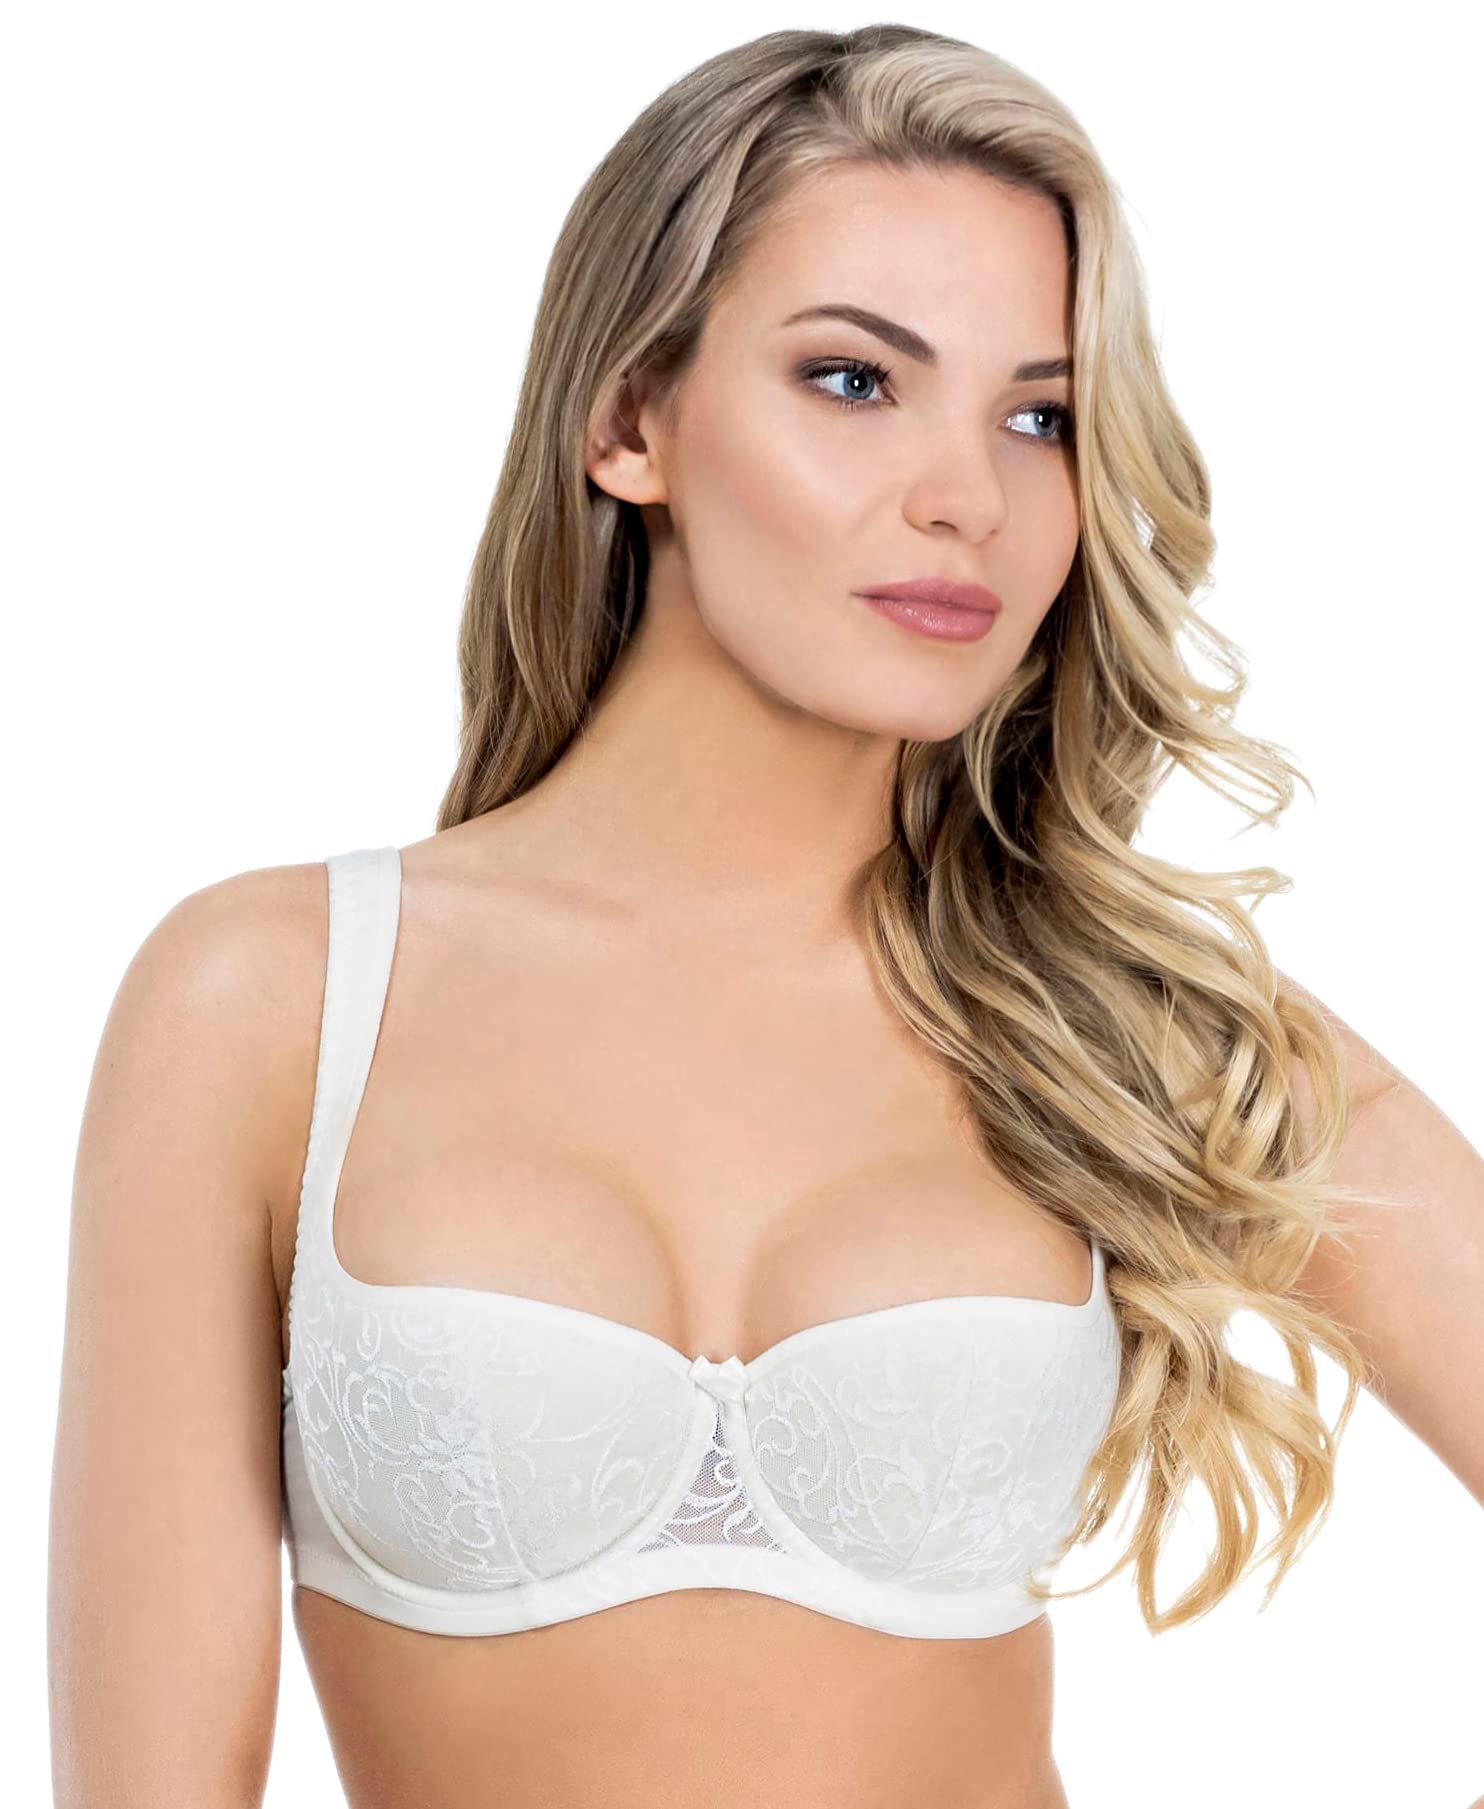 Rosme Womens Balconette Bra with Padded Straps, collection grand, Ivory,  Size 42B